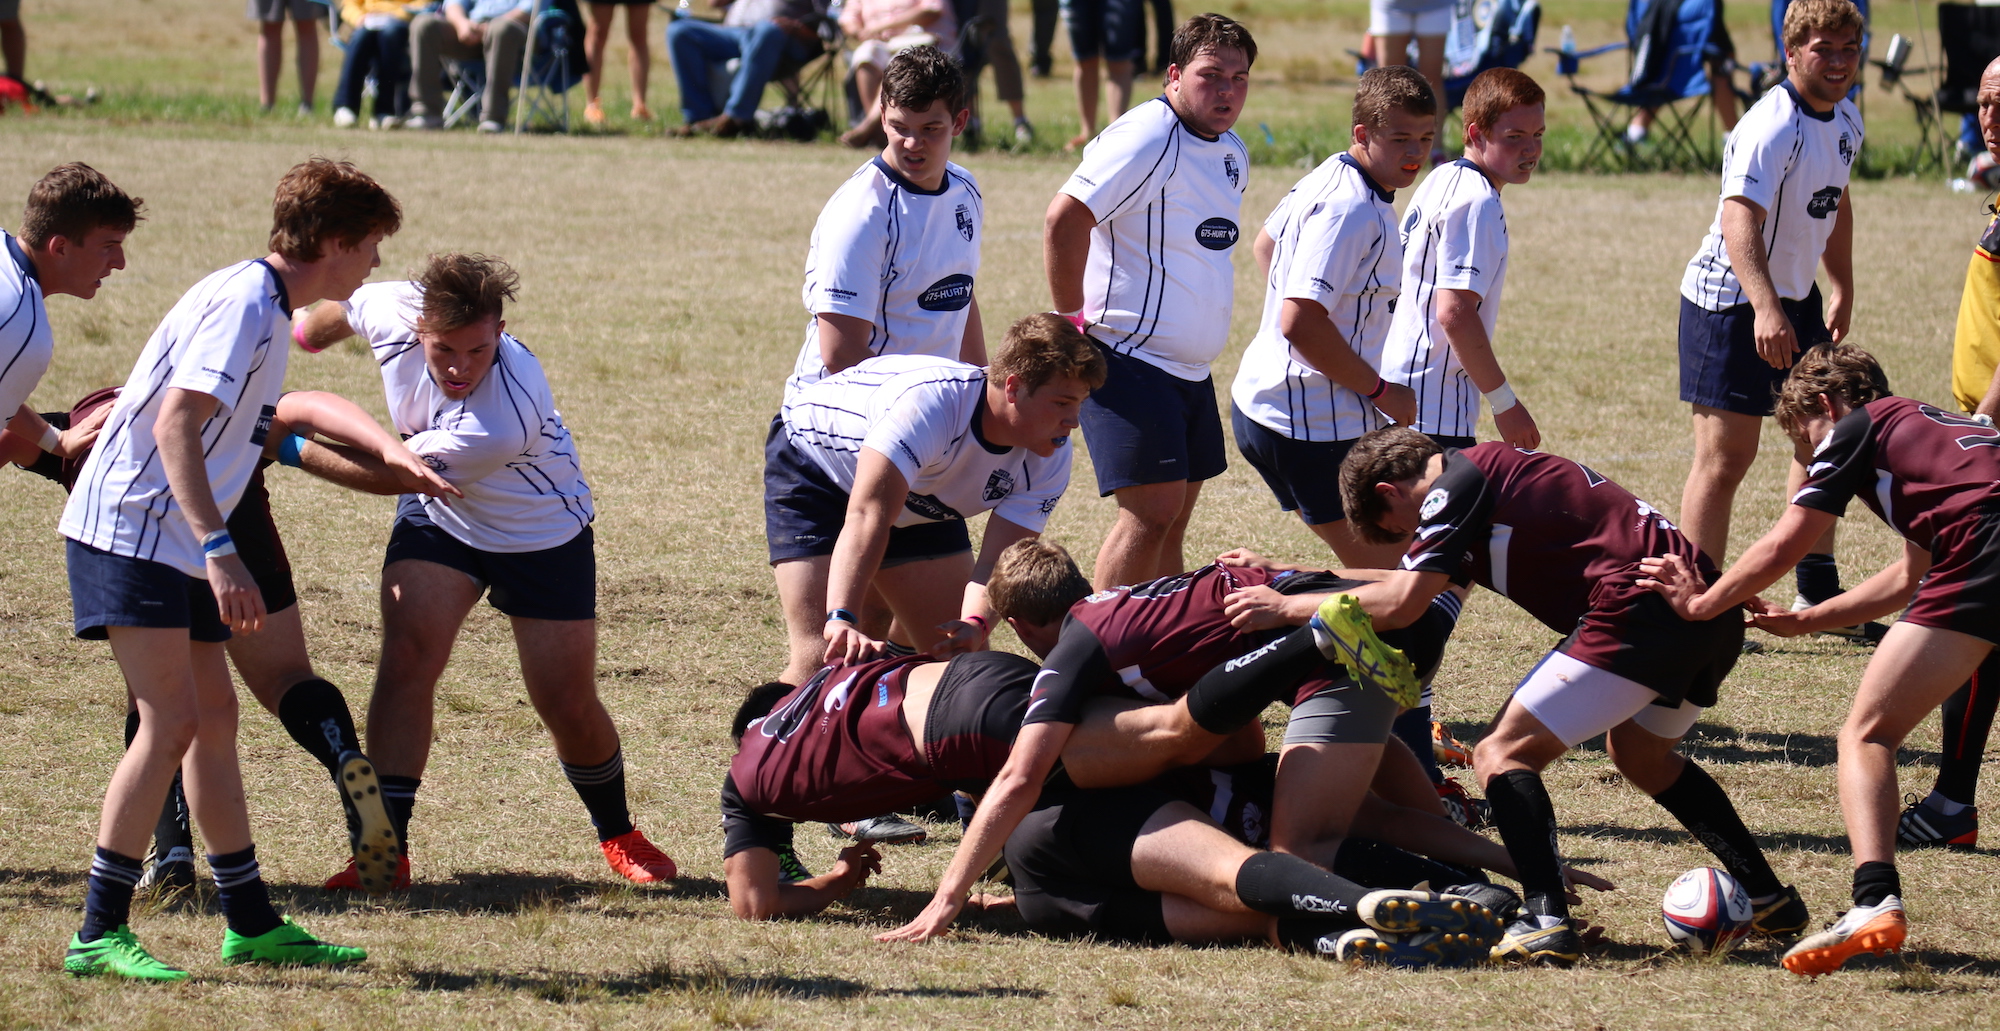 Wando rugby v South Greenville in South Carolina state rugby final 2017. Jamie Kingdom photo.